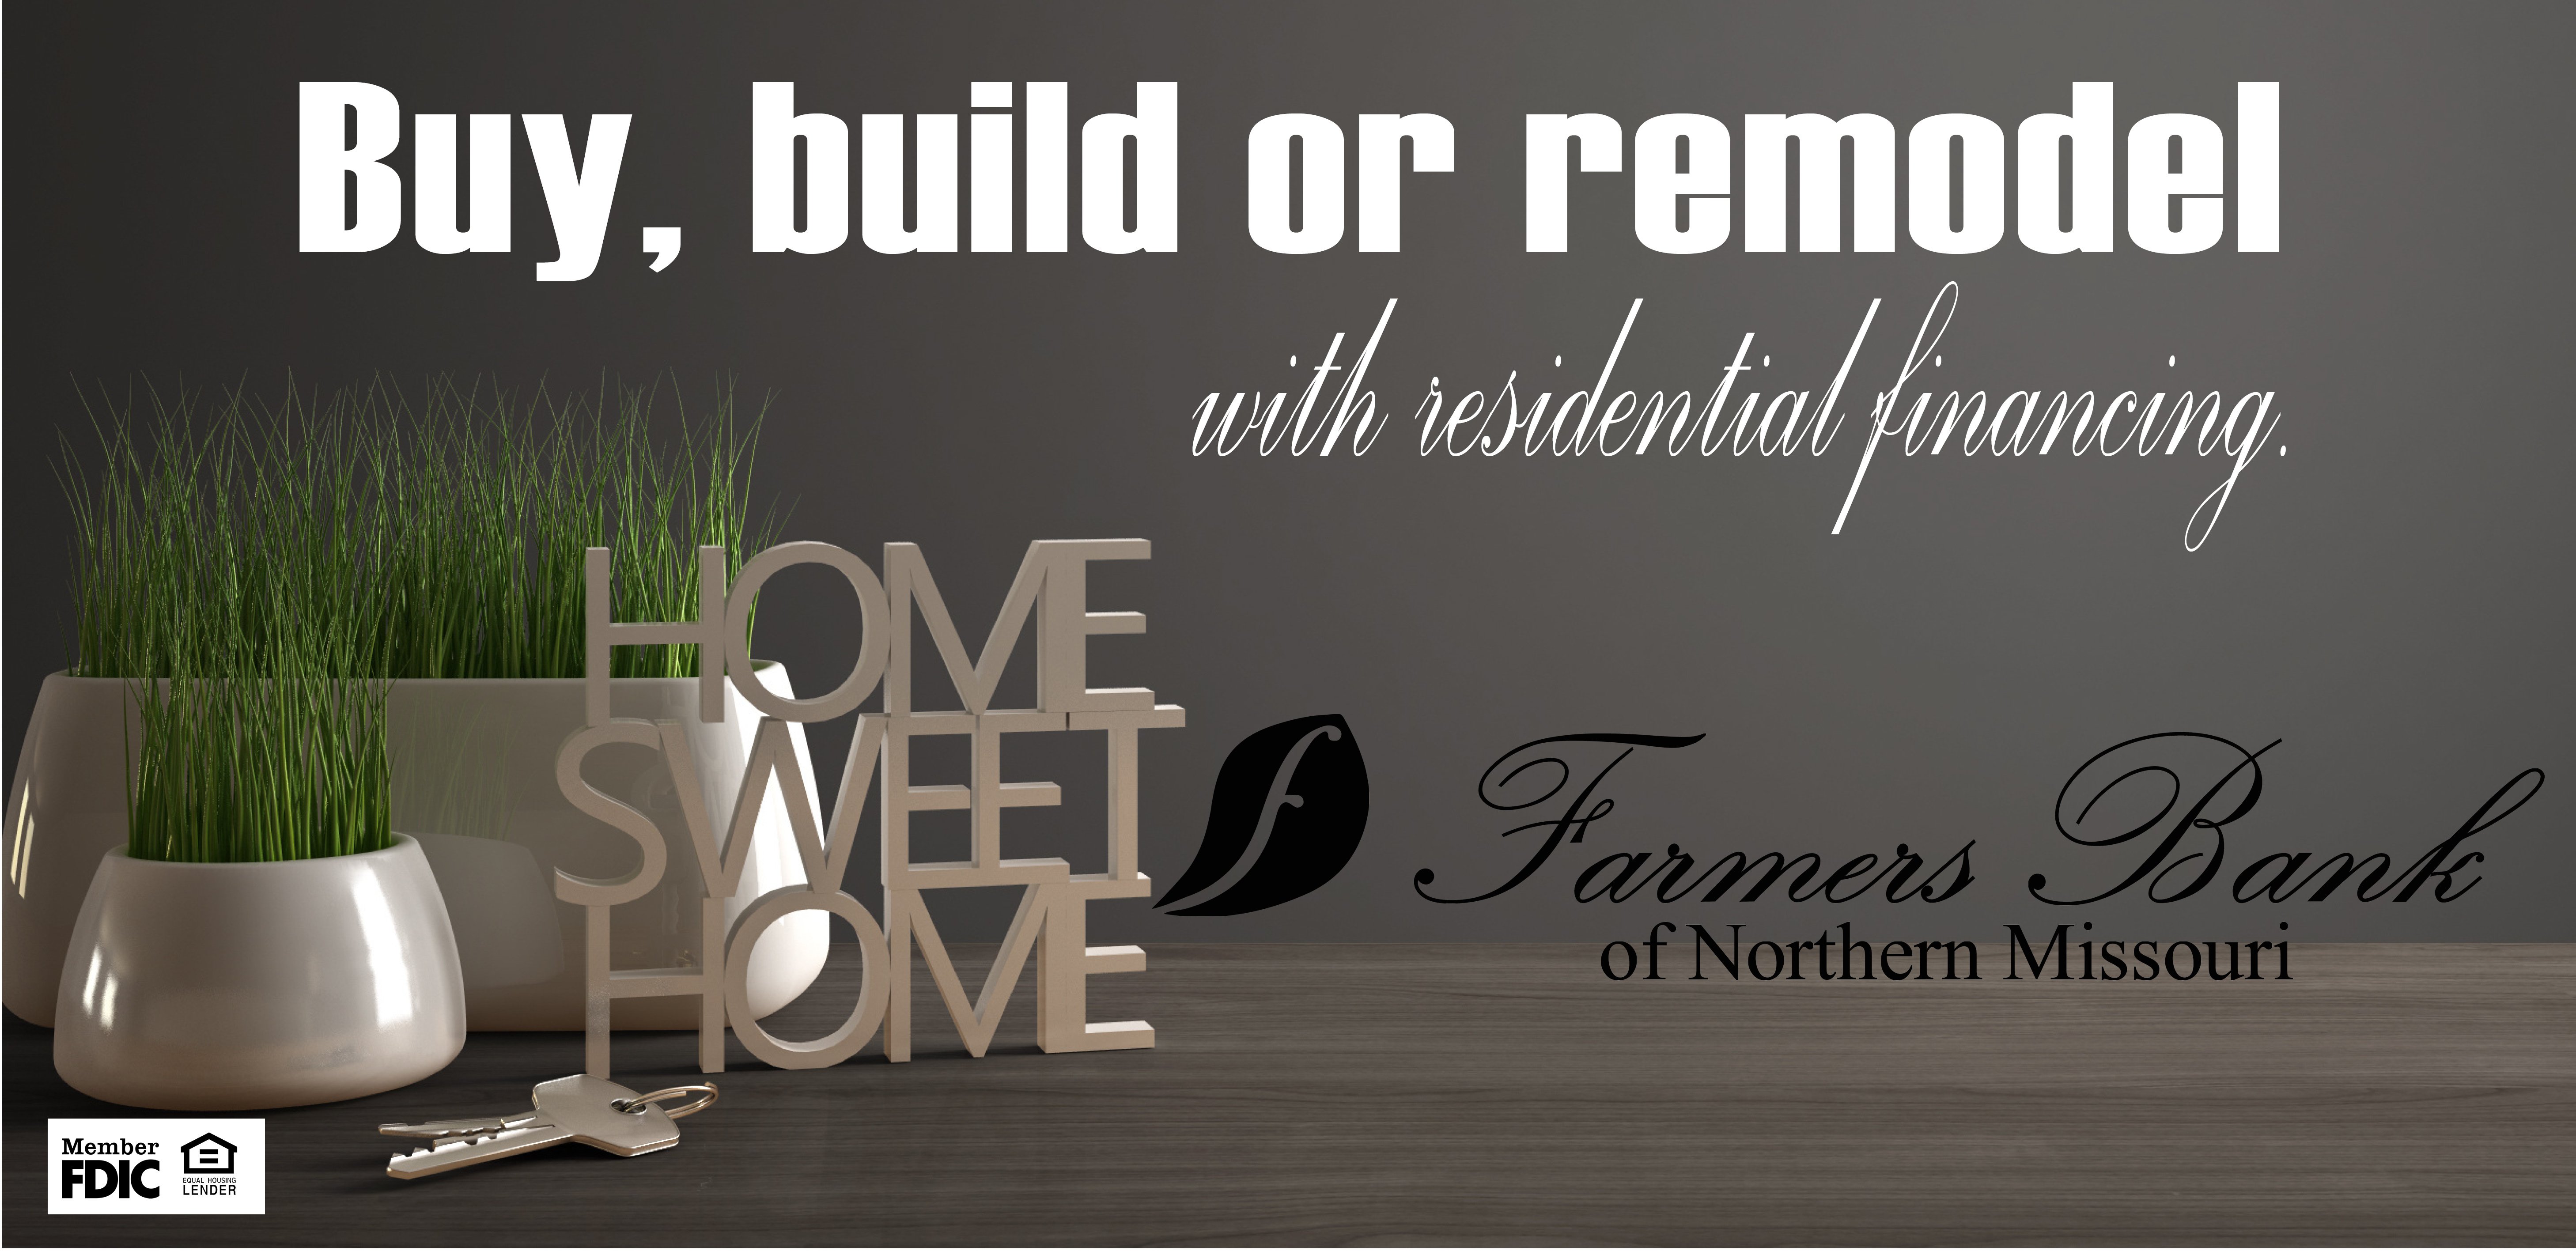 Buy, build or remodel with residential financing. Home Sweet Home. Farmers Bank of Northern Missouri, Member FDIC, Equal Housing Lender